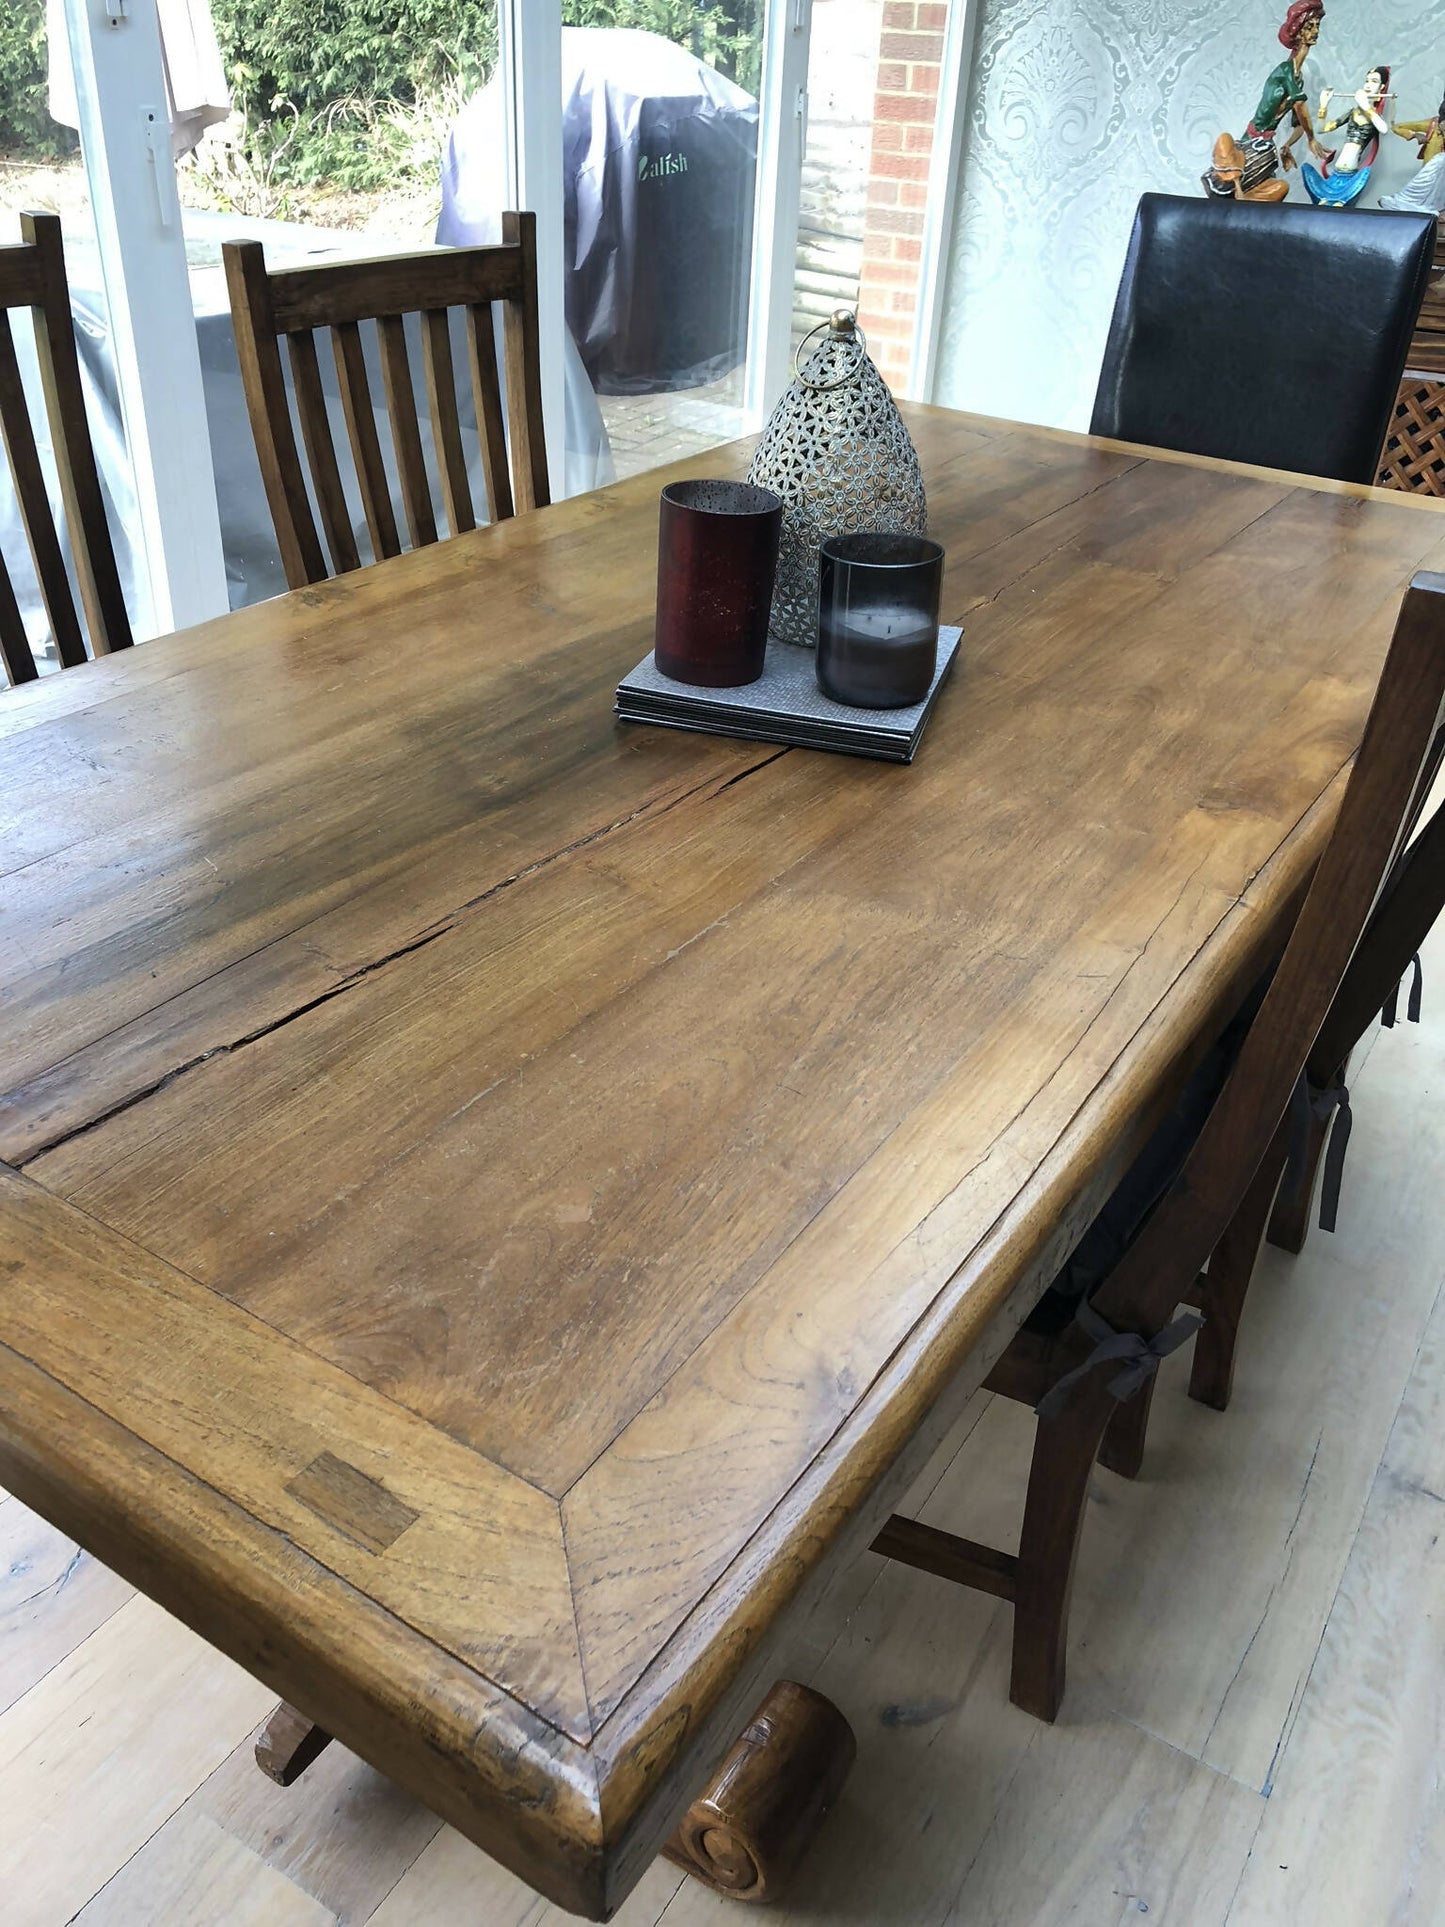 Solid Rustic Wood Dining Table with 4 matching chairs